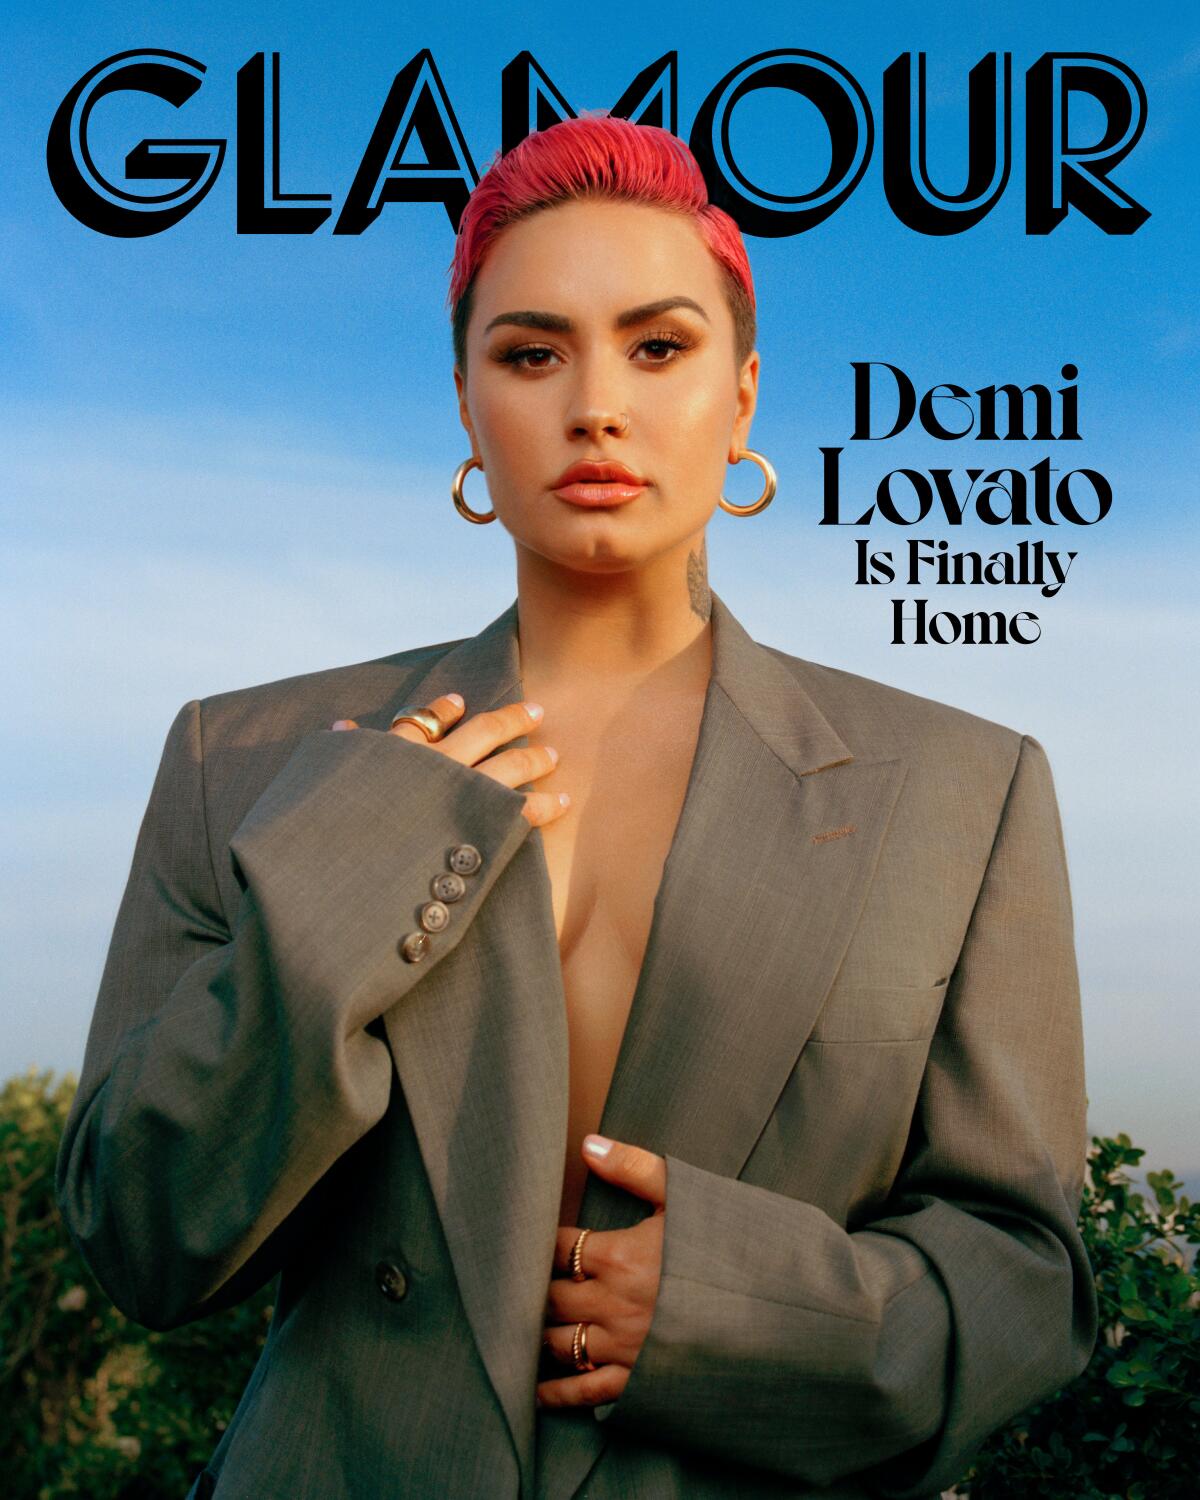 Demi Lovato in a suit jacket with no shirt on the March cover of Glamour